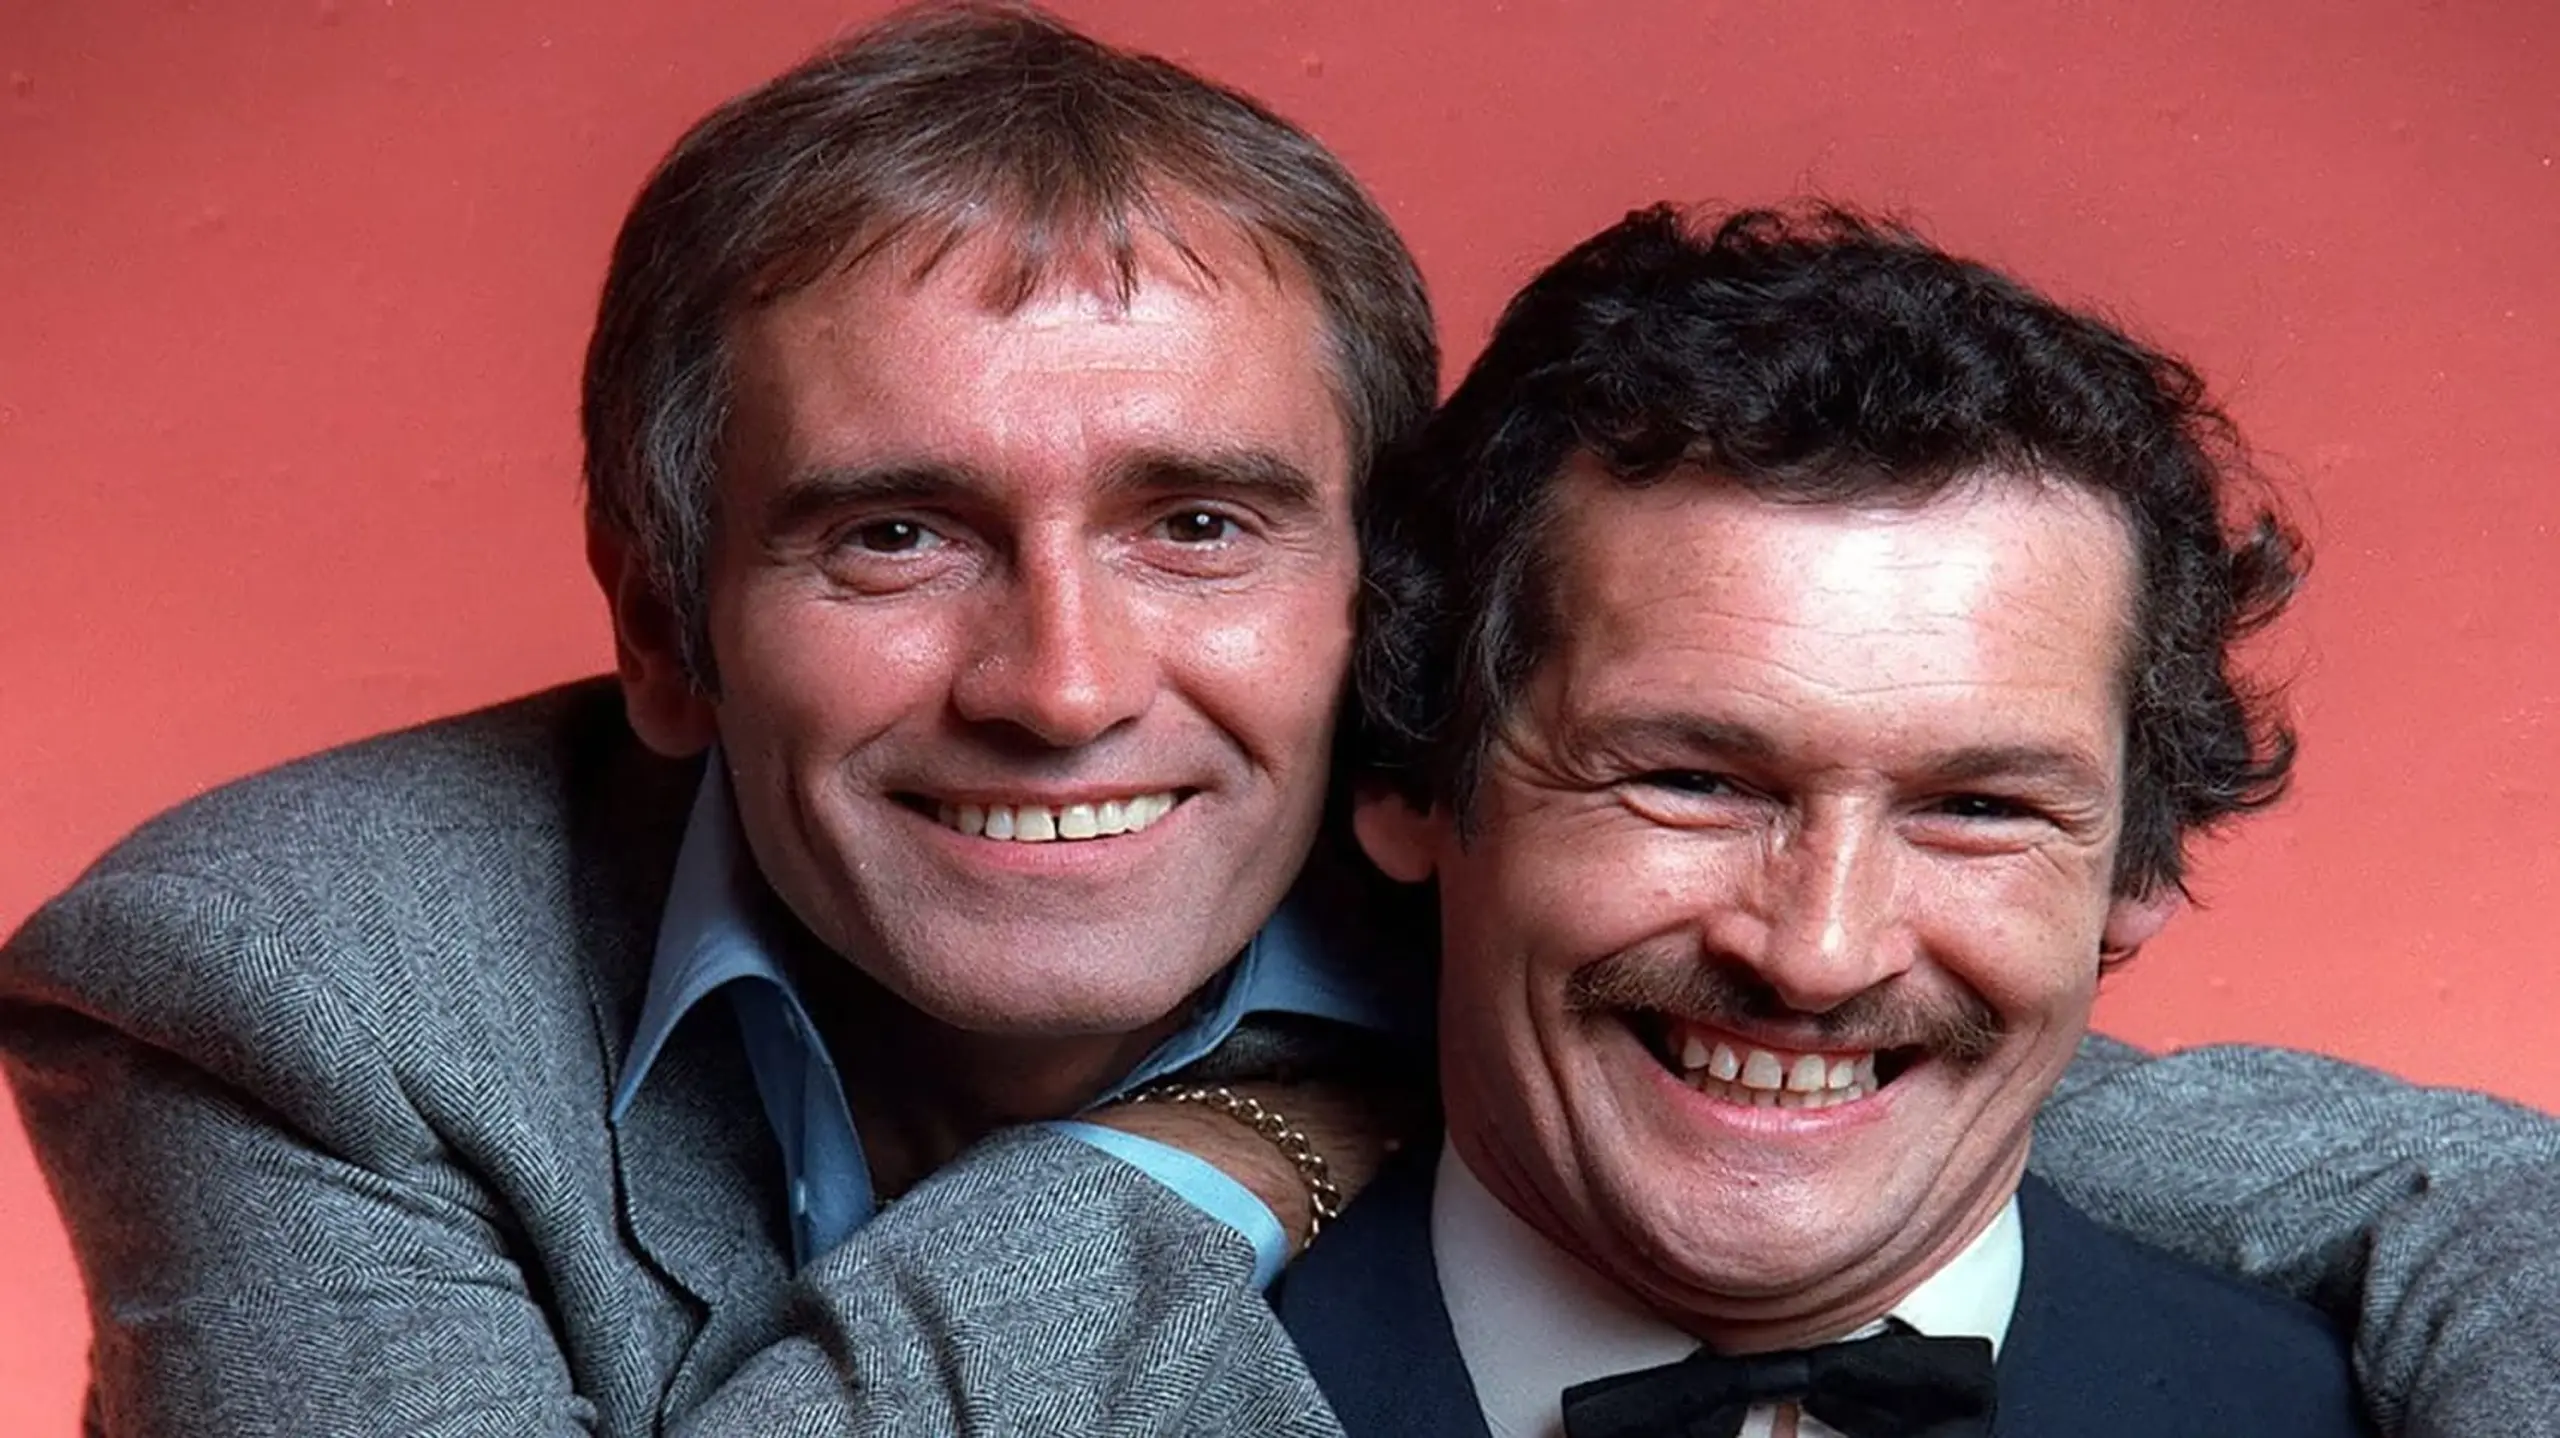 The Cannon & Ball Show